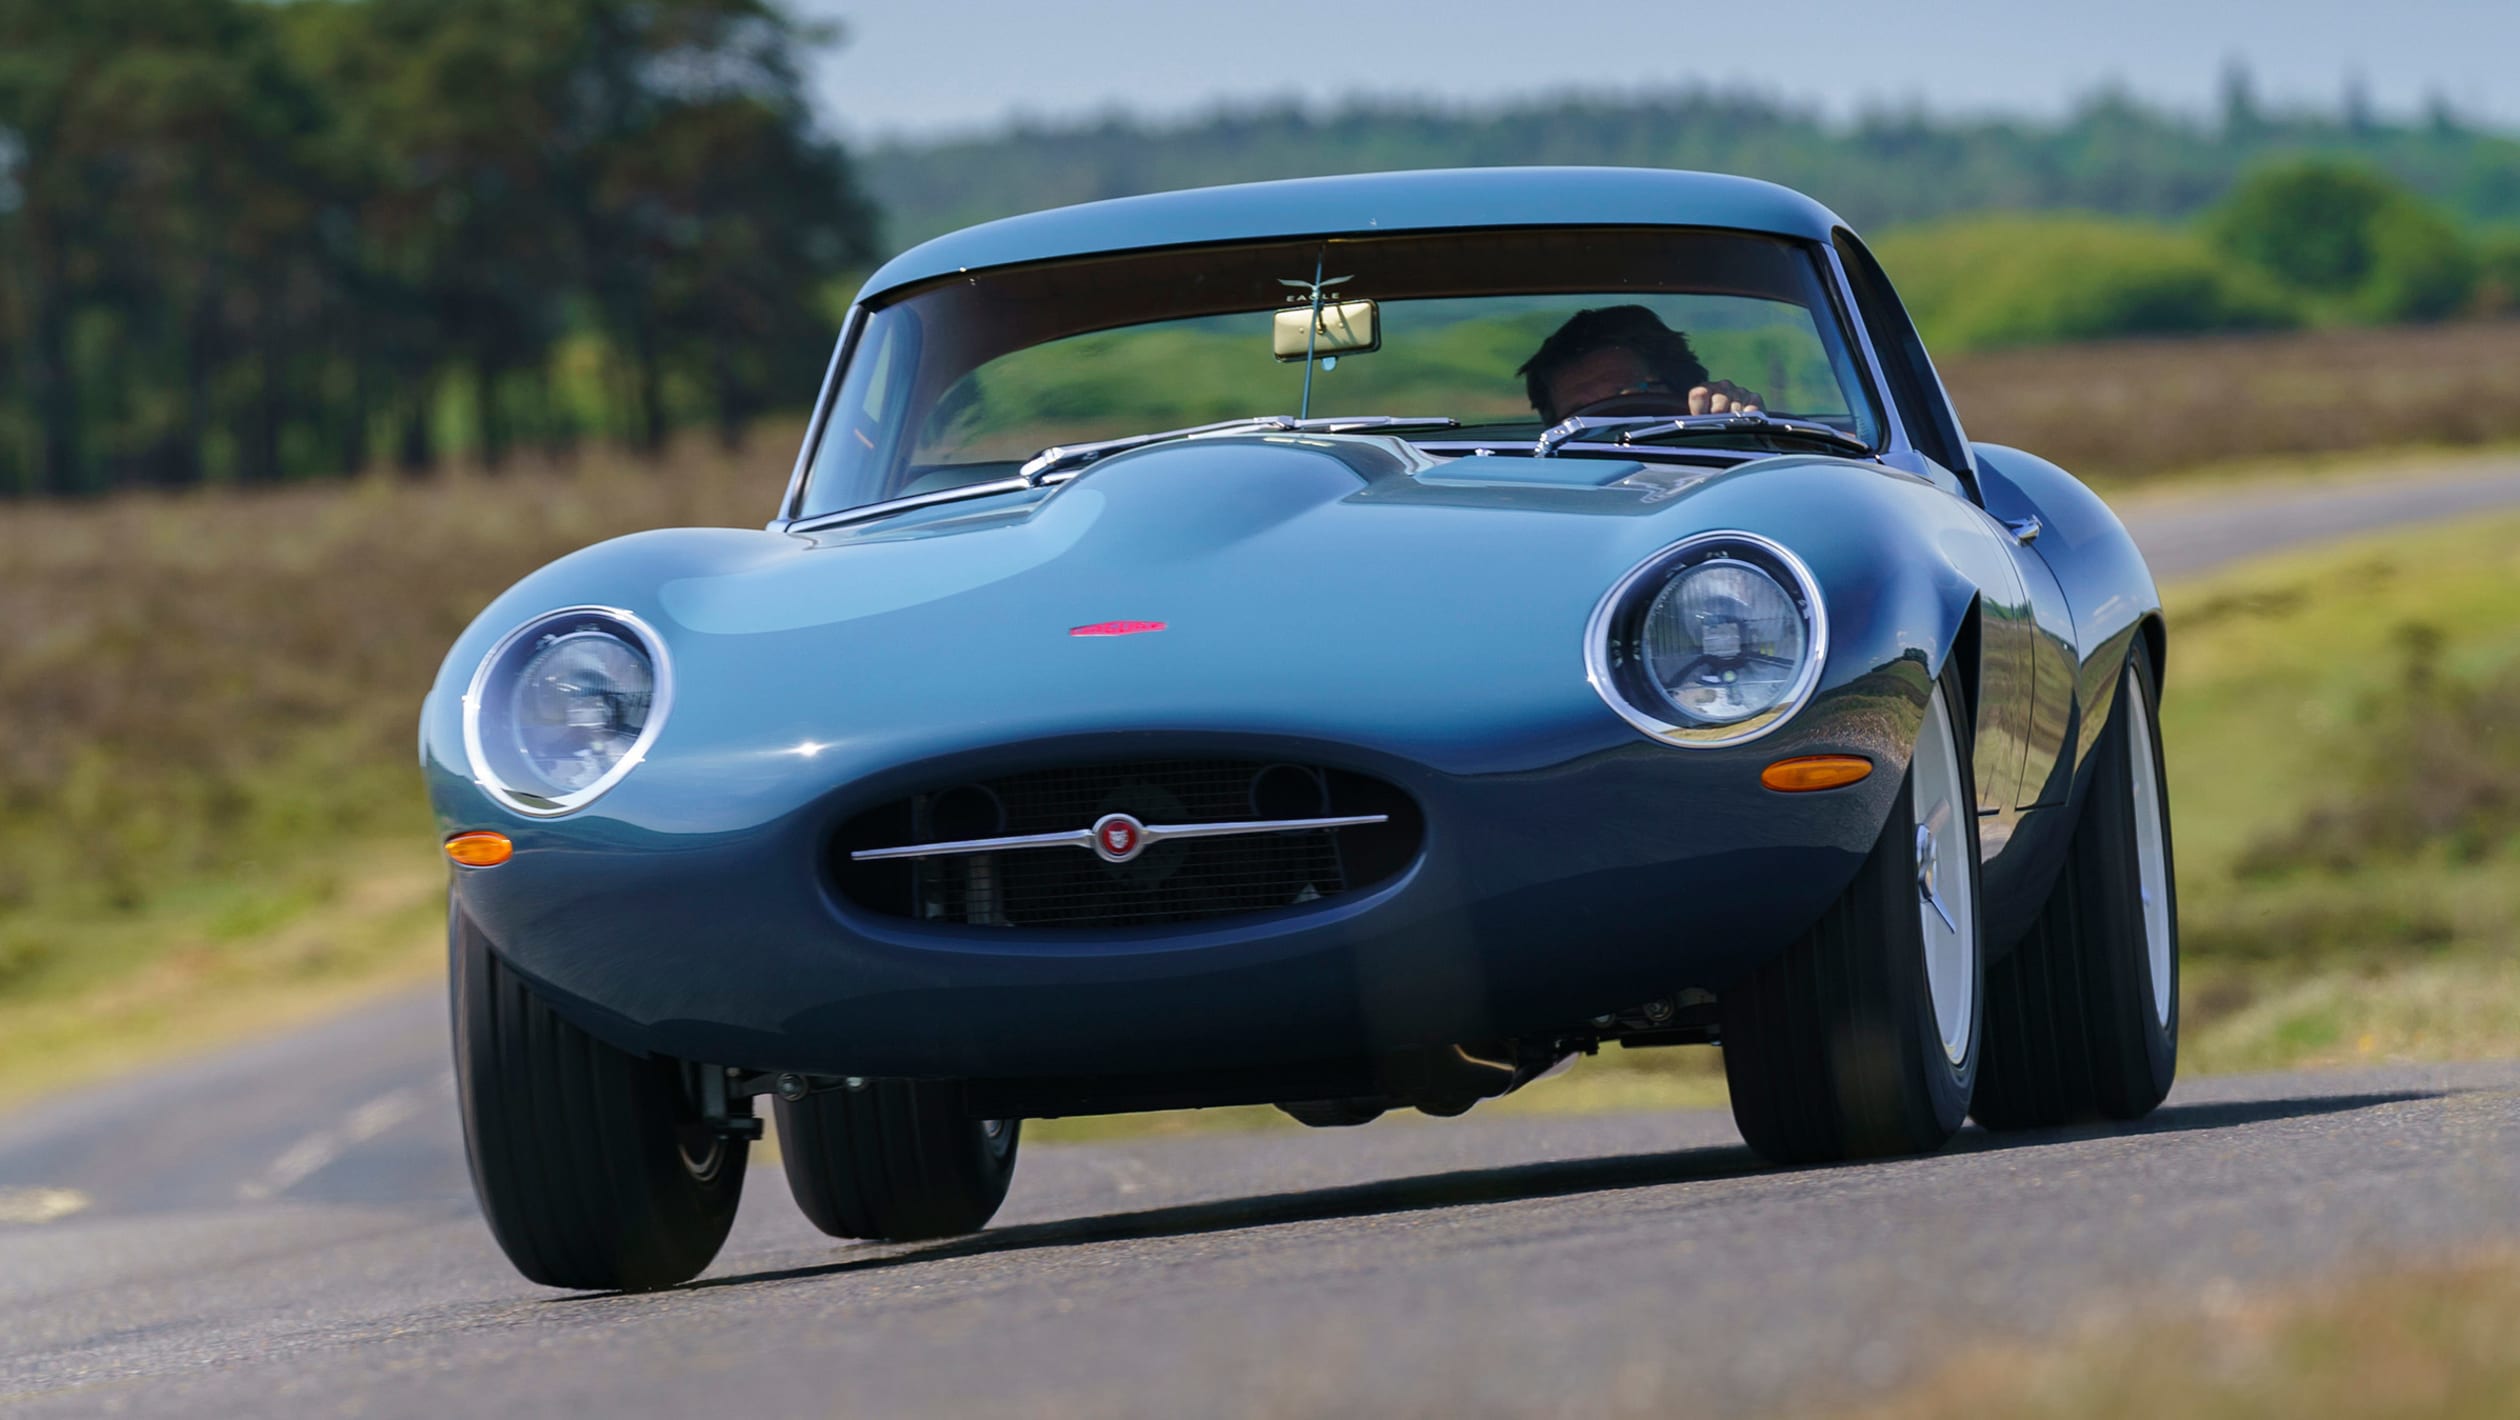 aria-label="New Eagle E Type Lightweight GT"